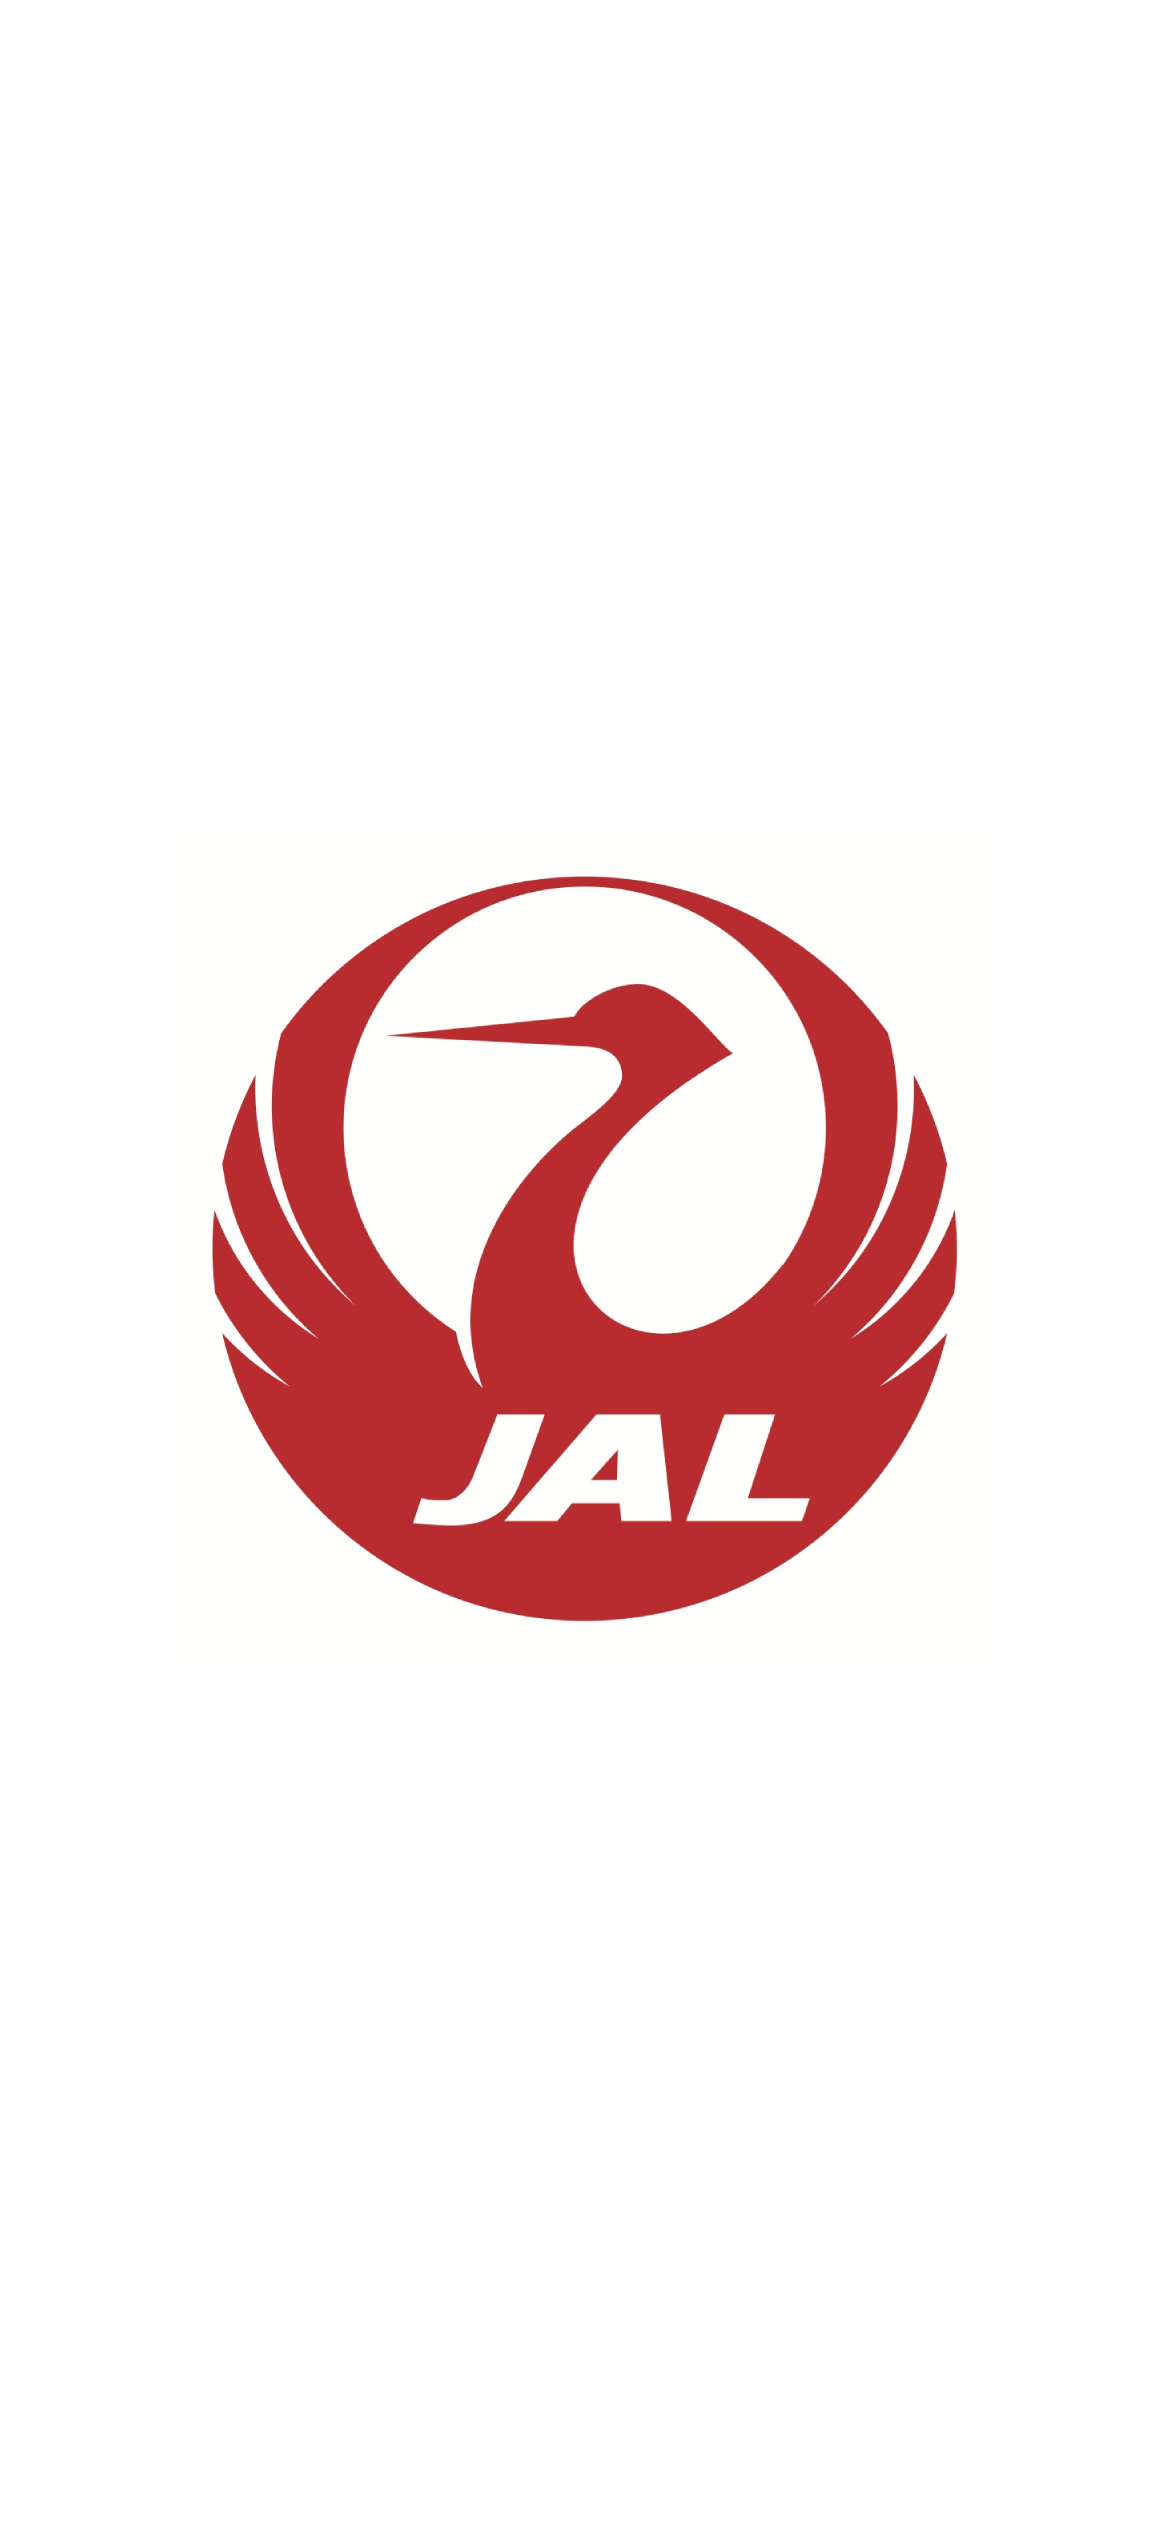 Jal Japan Airlines 日本航空 Iphone 13 Pro壁紙 待ち受け スマラン